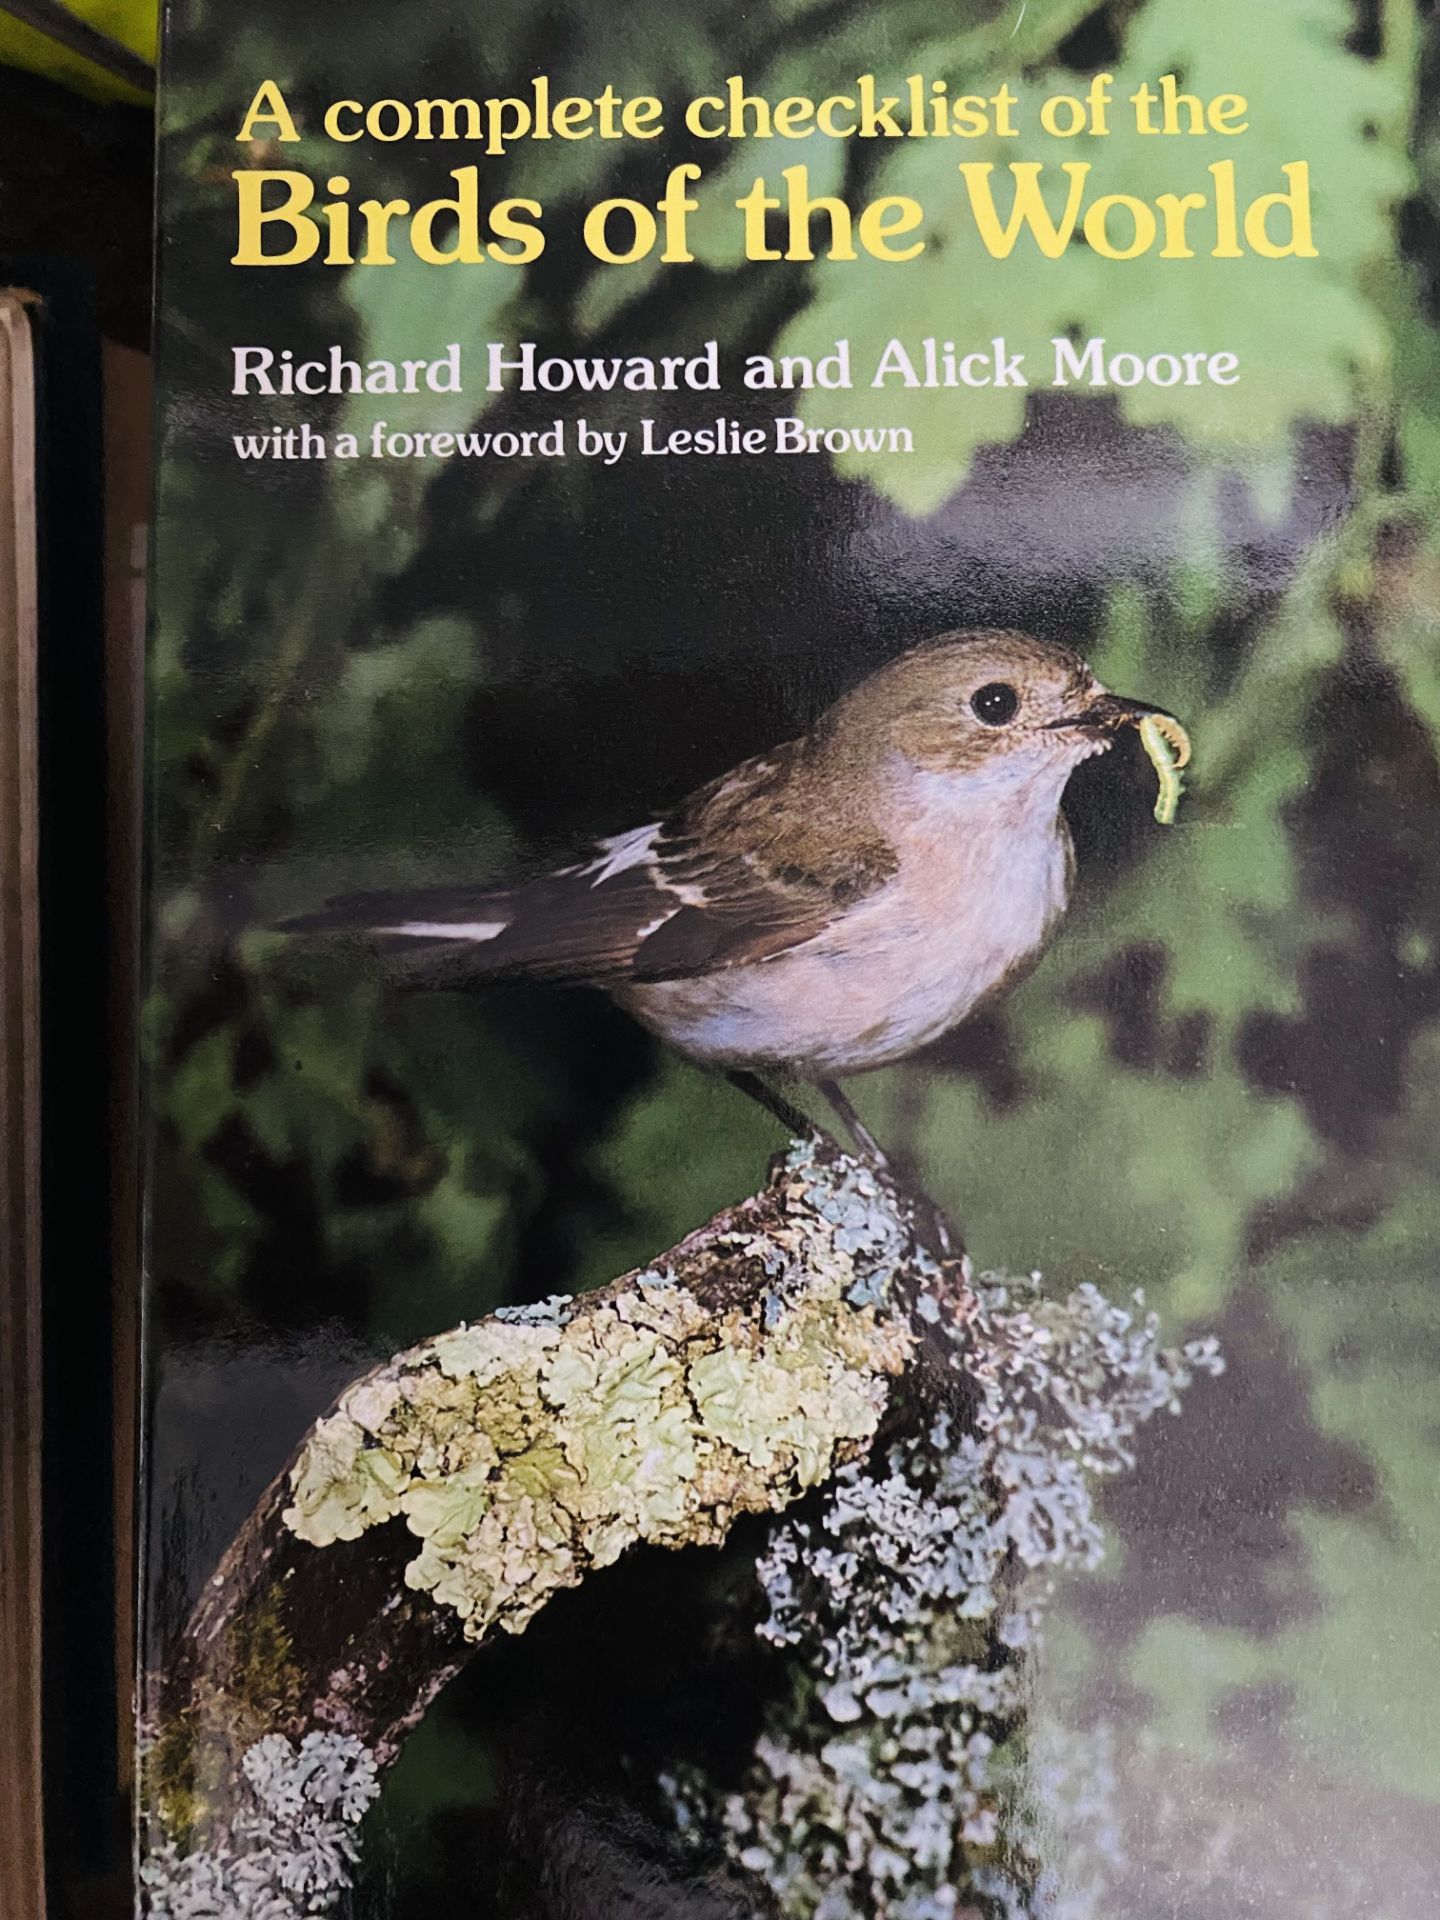 Twelve copies of A Complete Checklist of the Birds of the World by Richard Howard